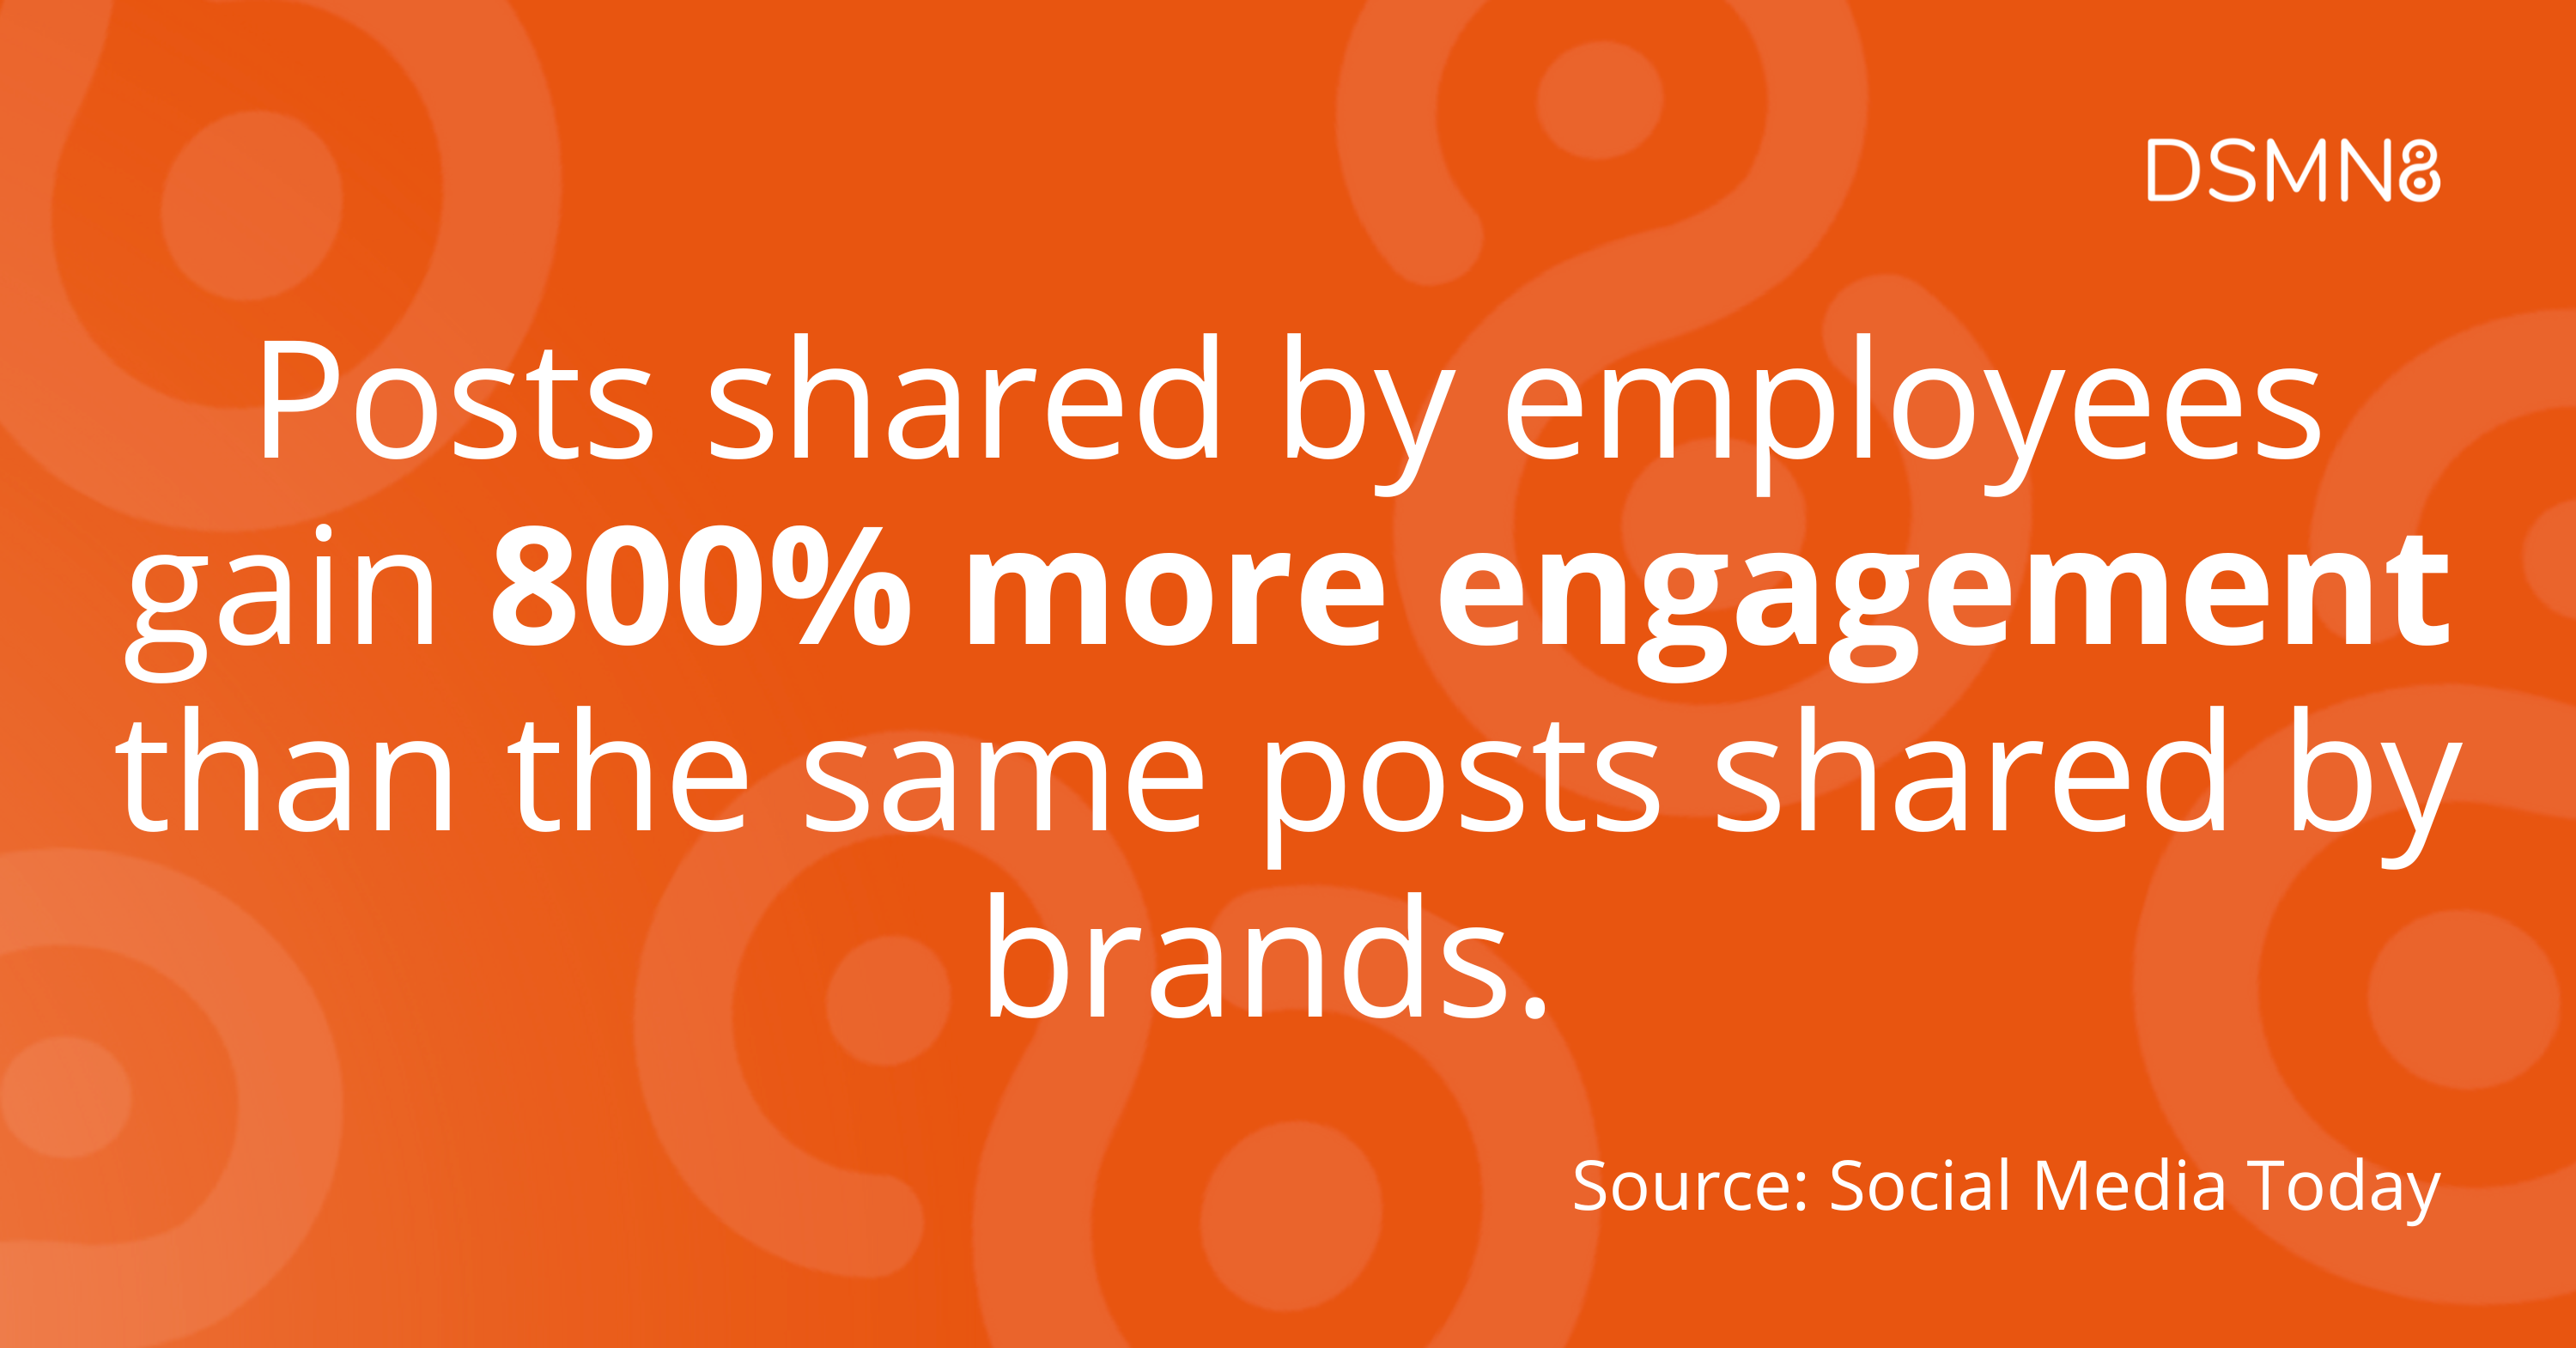 Posts shared by employees gain 800% more engagement than the same posts shared by brands.